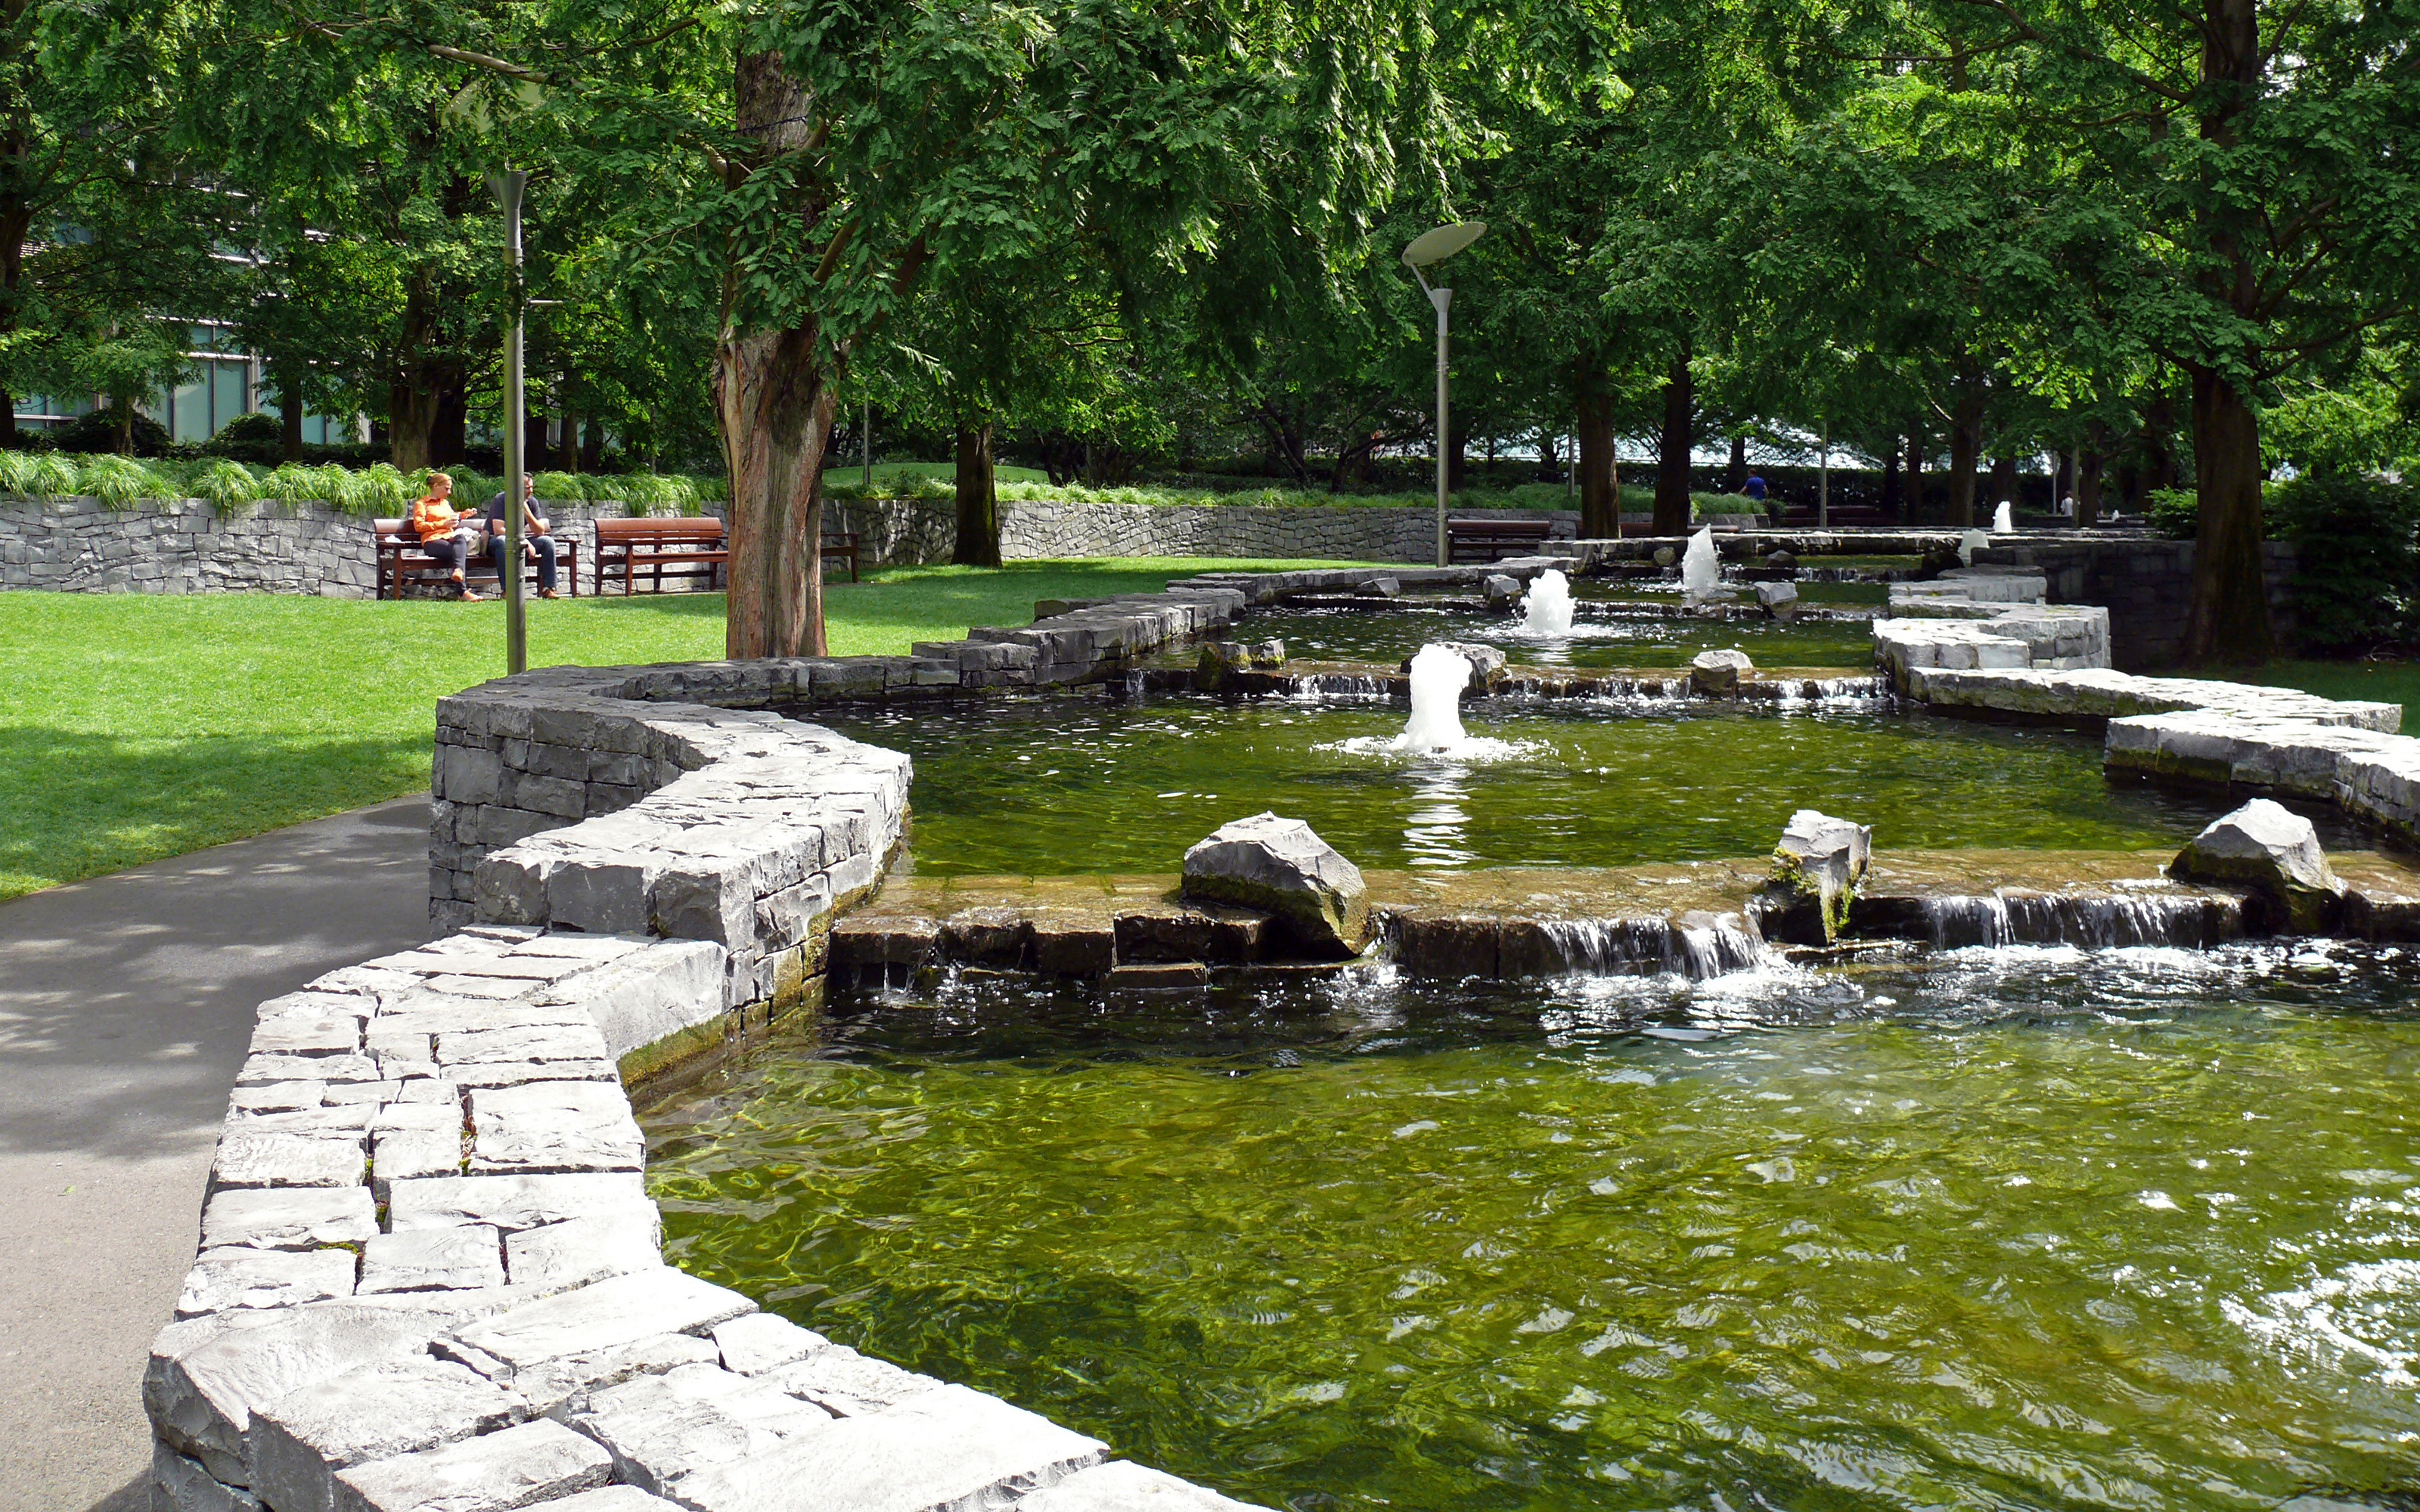 Channel-like water feature with small fountains